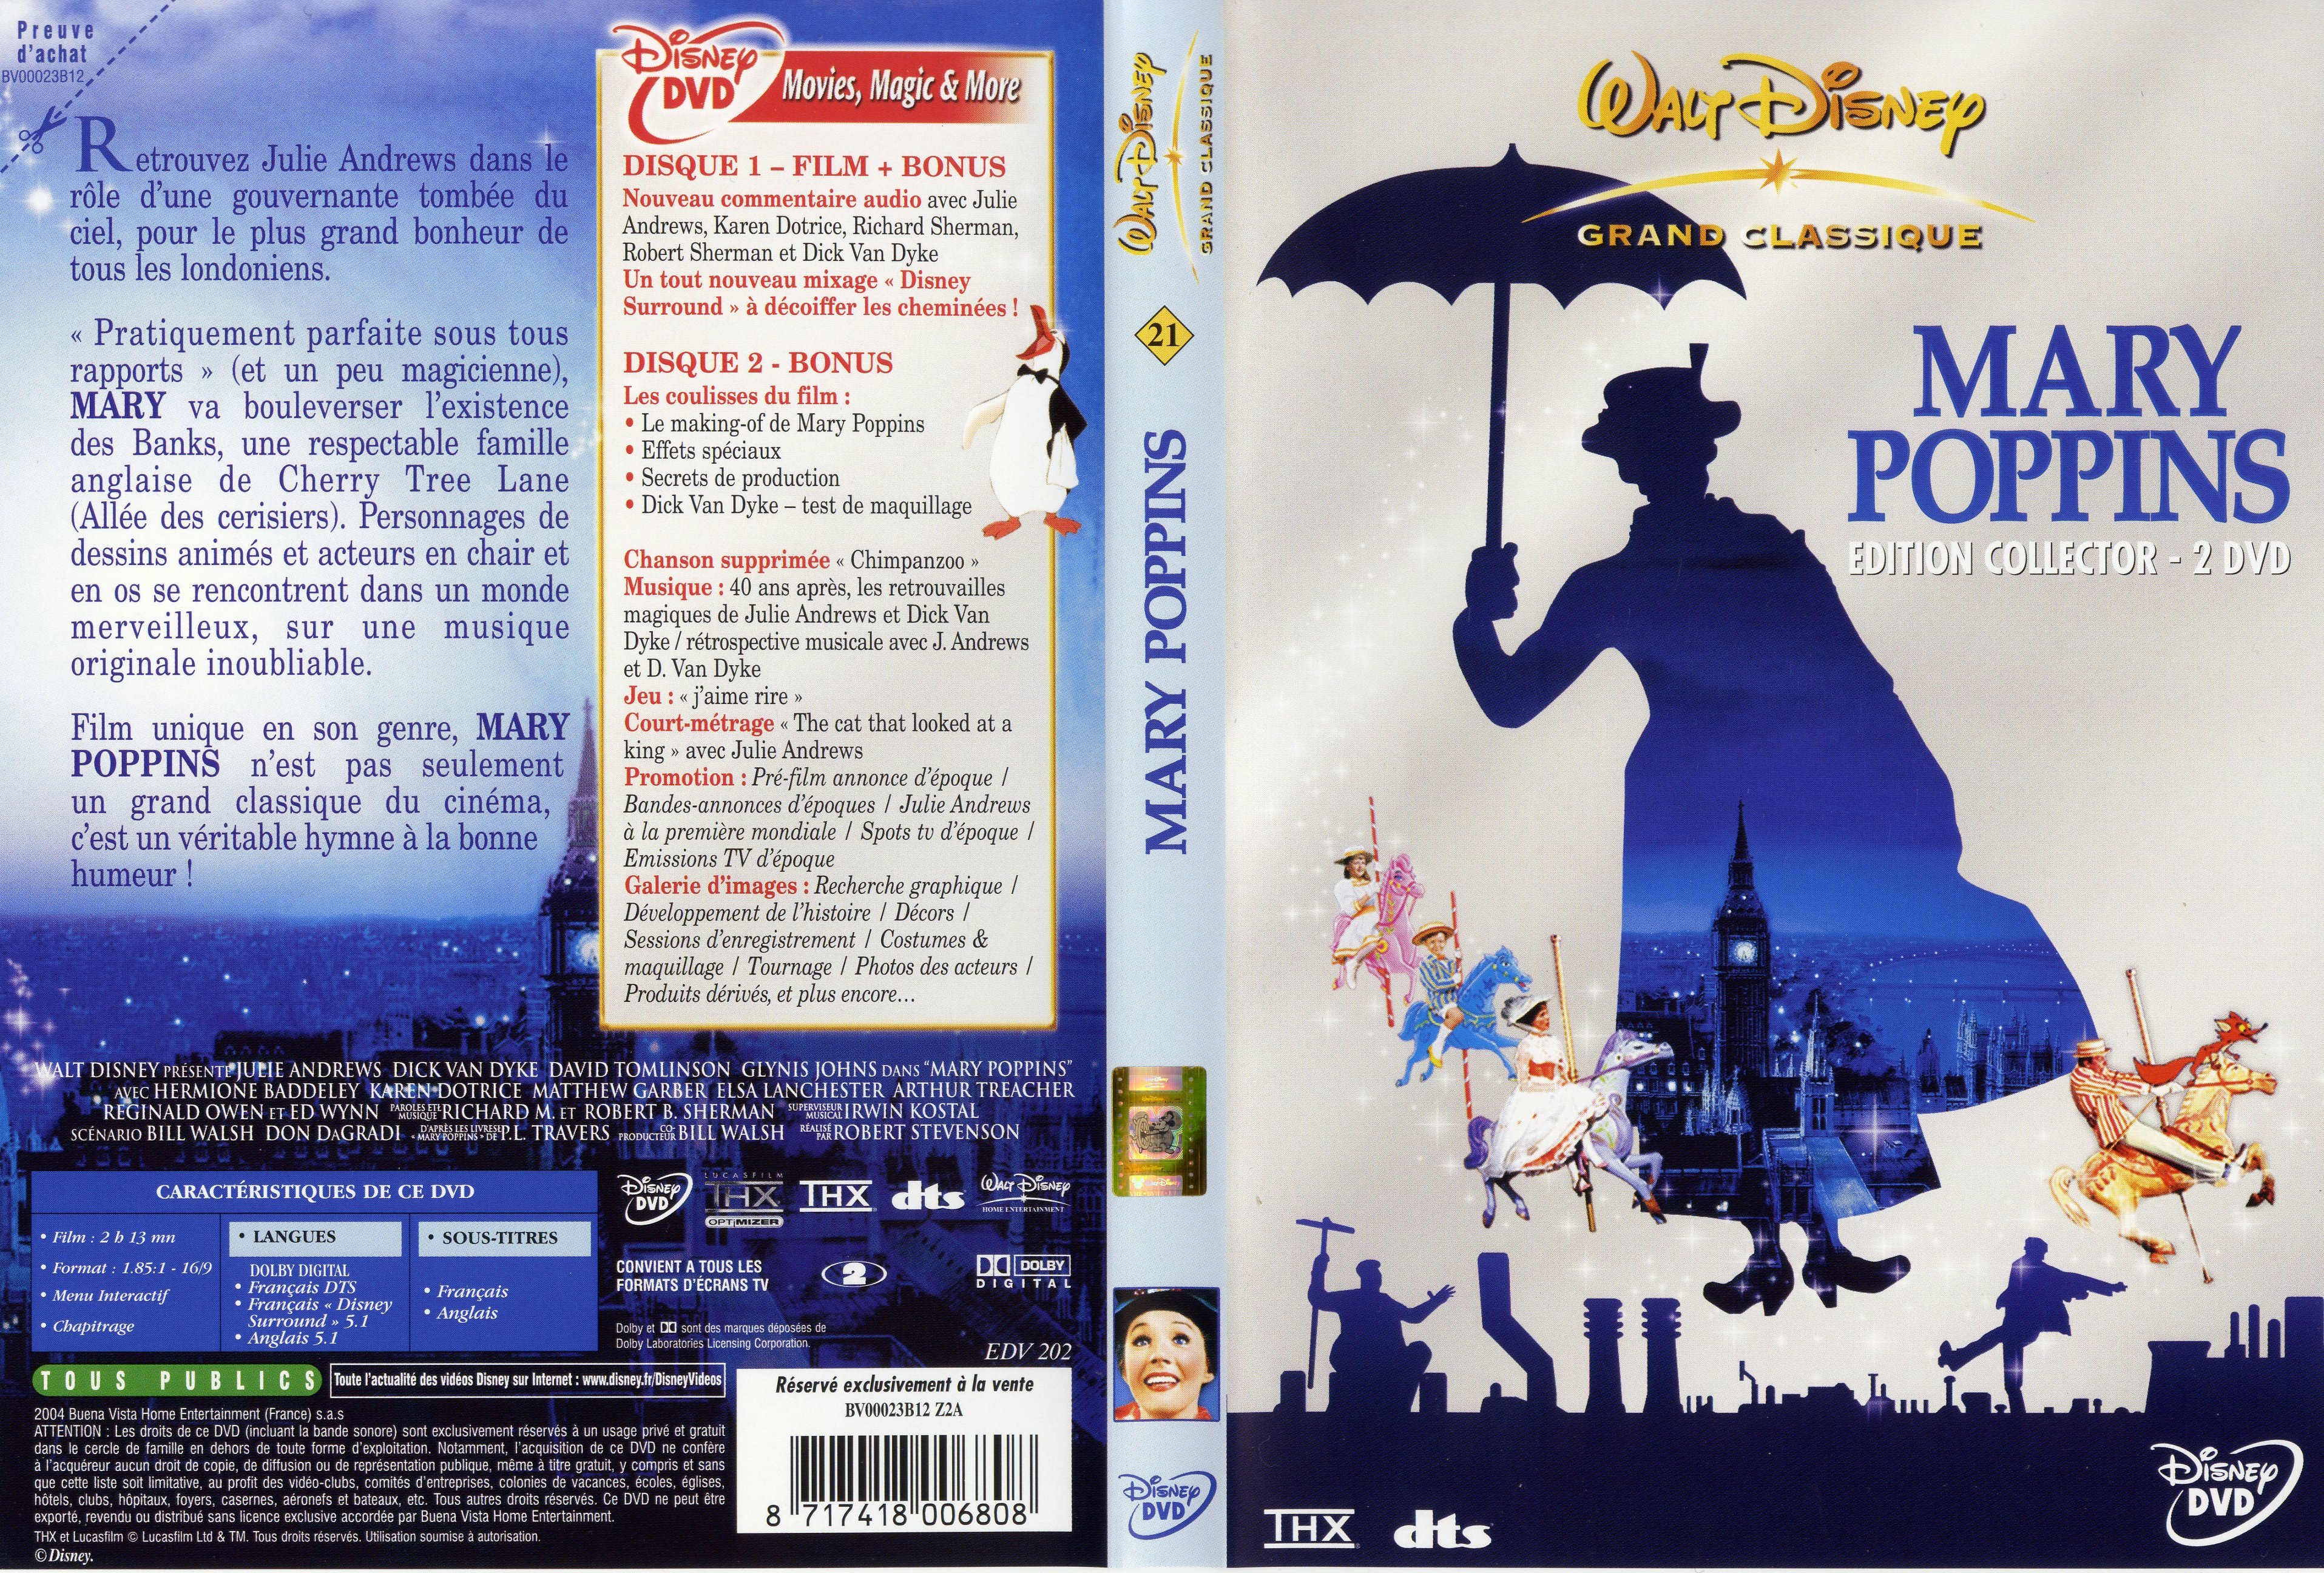 Jaquette DVD Mary Poppins v2